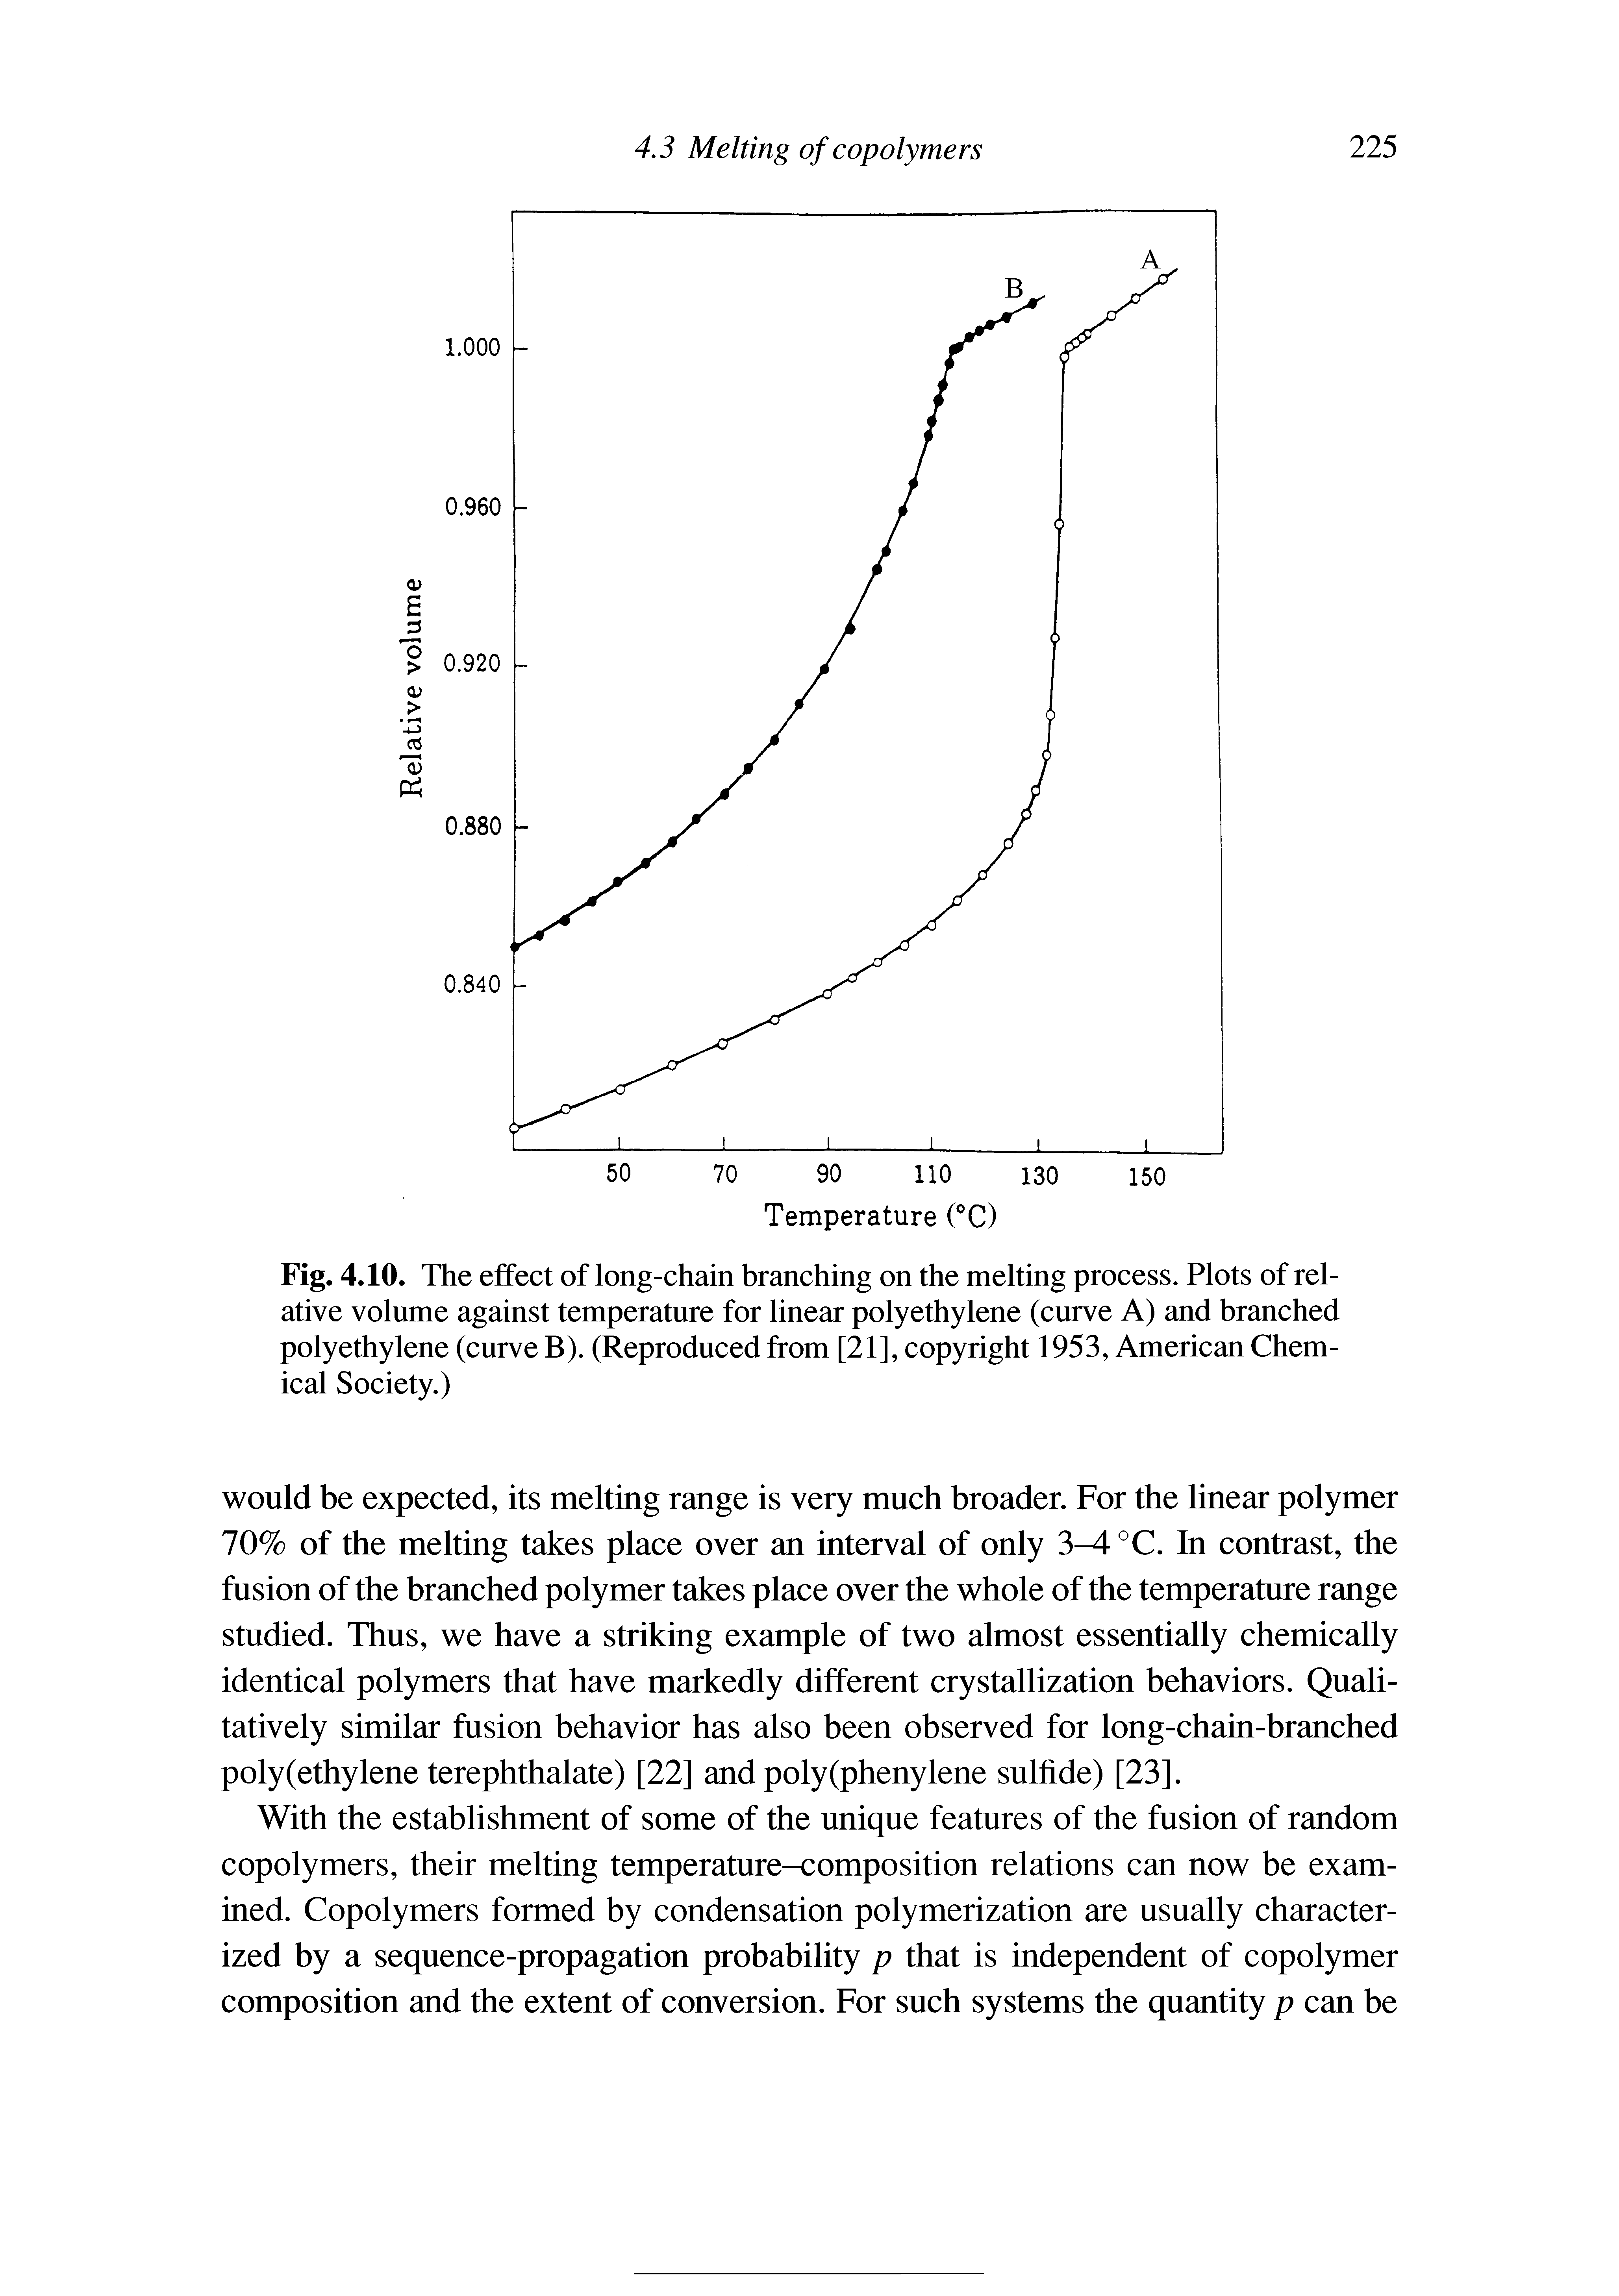 Fig. 4.10. The effect of long-chain branching on the melting process. Plots of relative volume against temperature for linear polyethylene (curve A) and branched polyethylene (curve B). (Reproduced from [21], copyright 1953, American Chemical Society.)...